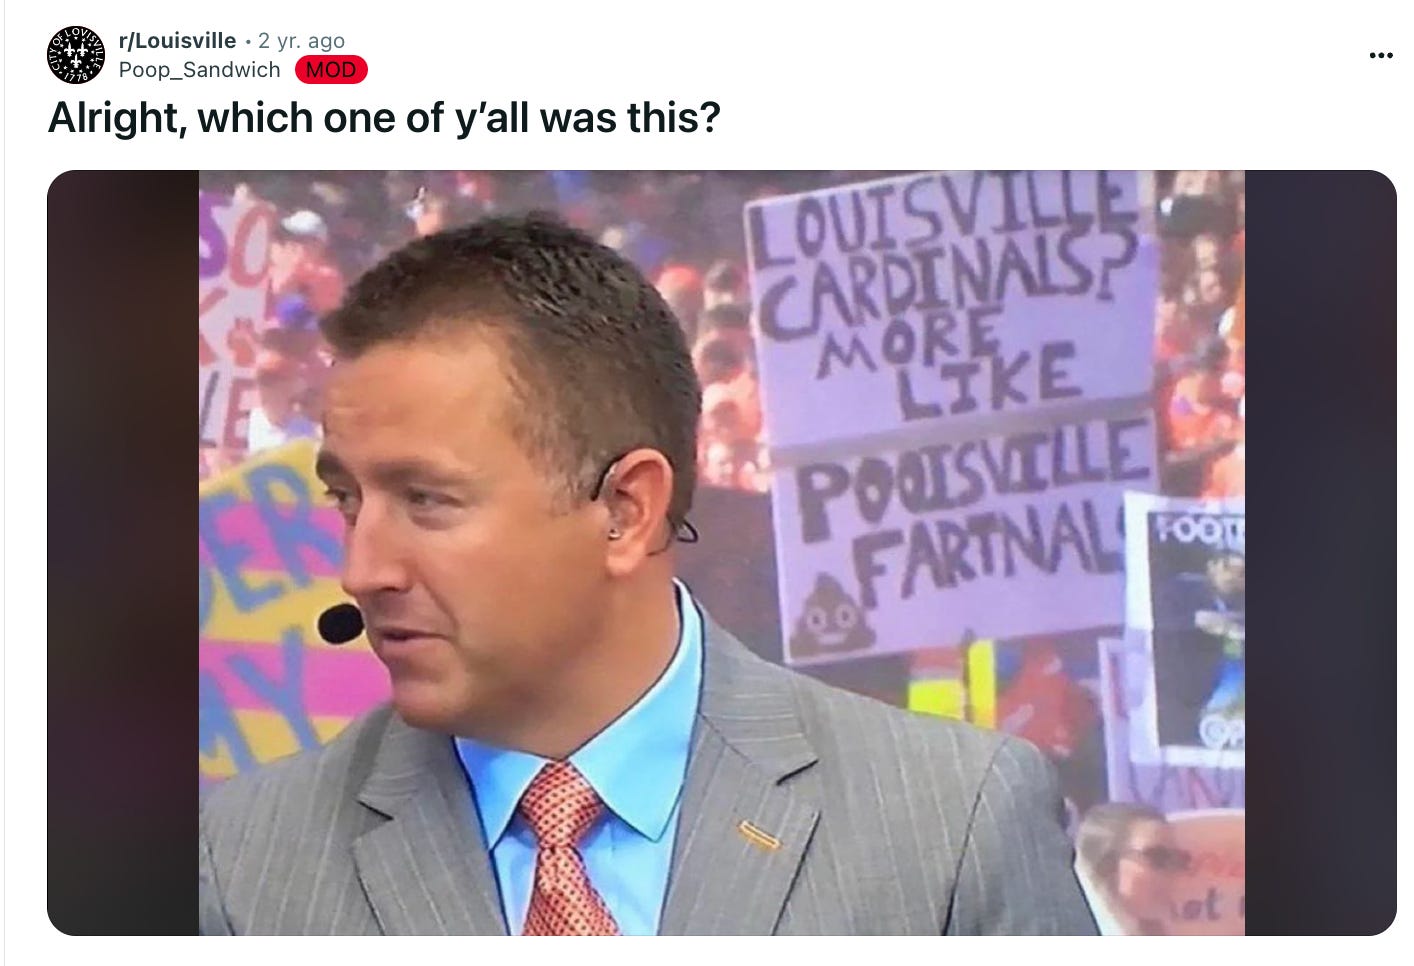 A reddit post by Poop_Sandwich that asks, Alright, which one of y'all was this? with the sign in the background of a TV sportscaster that reads LOUISVILLE CARDINALS? MORE LIKE POOISVILLE FARTNALS